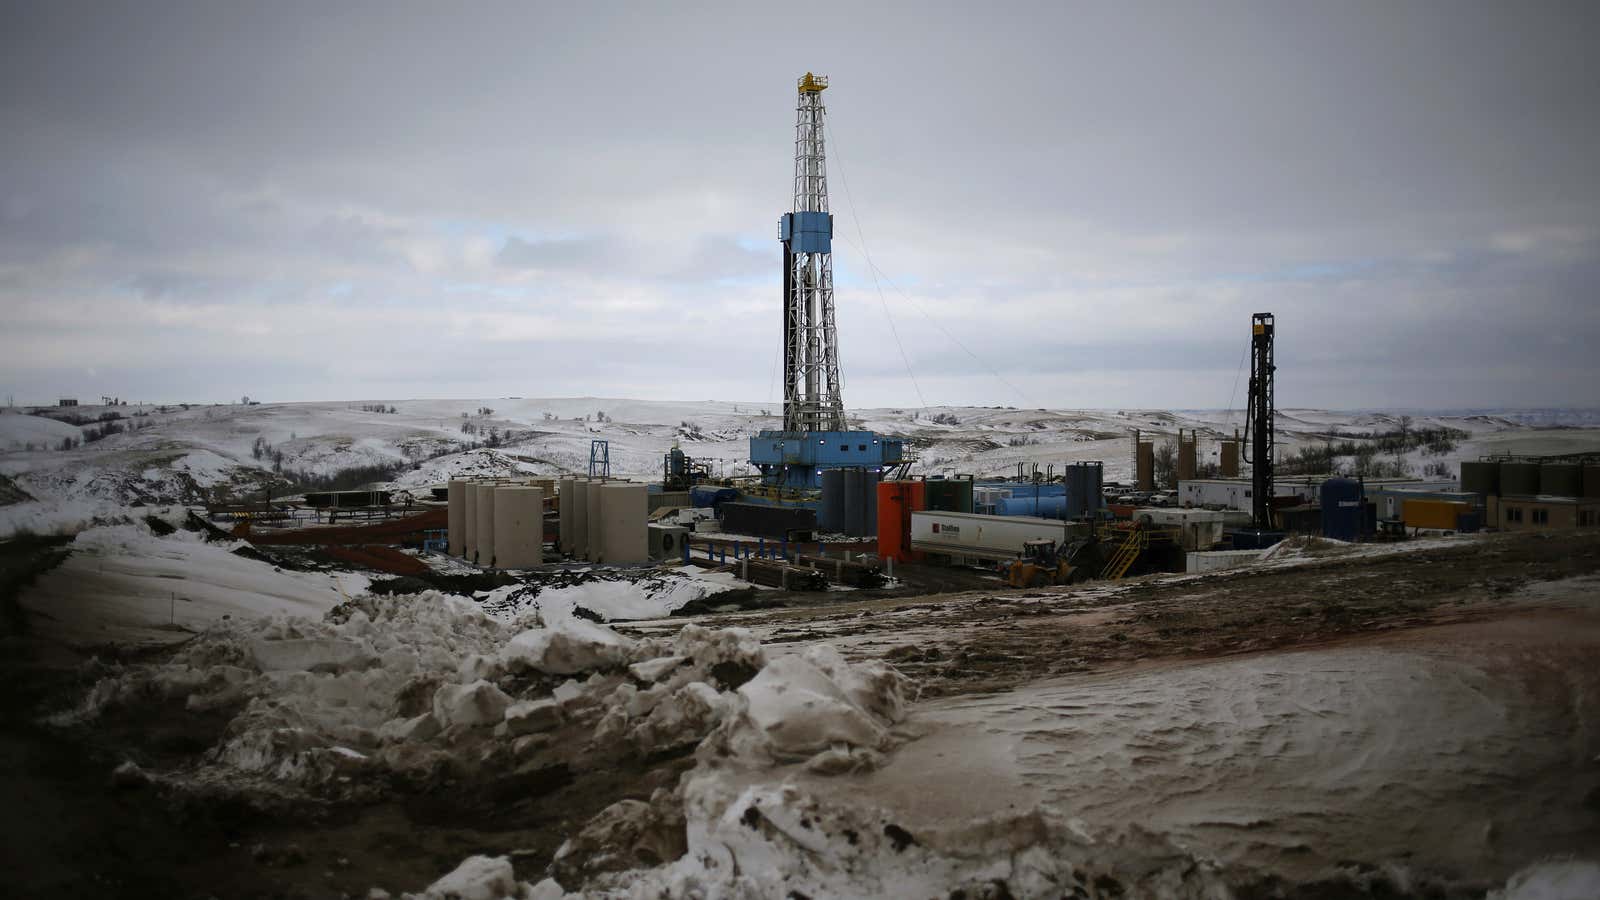 An oil derrick is seen at a fracking site for extracting oil outside of Williston, North Dakota March 11, 2013. North Dakota’s booming oil business…